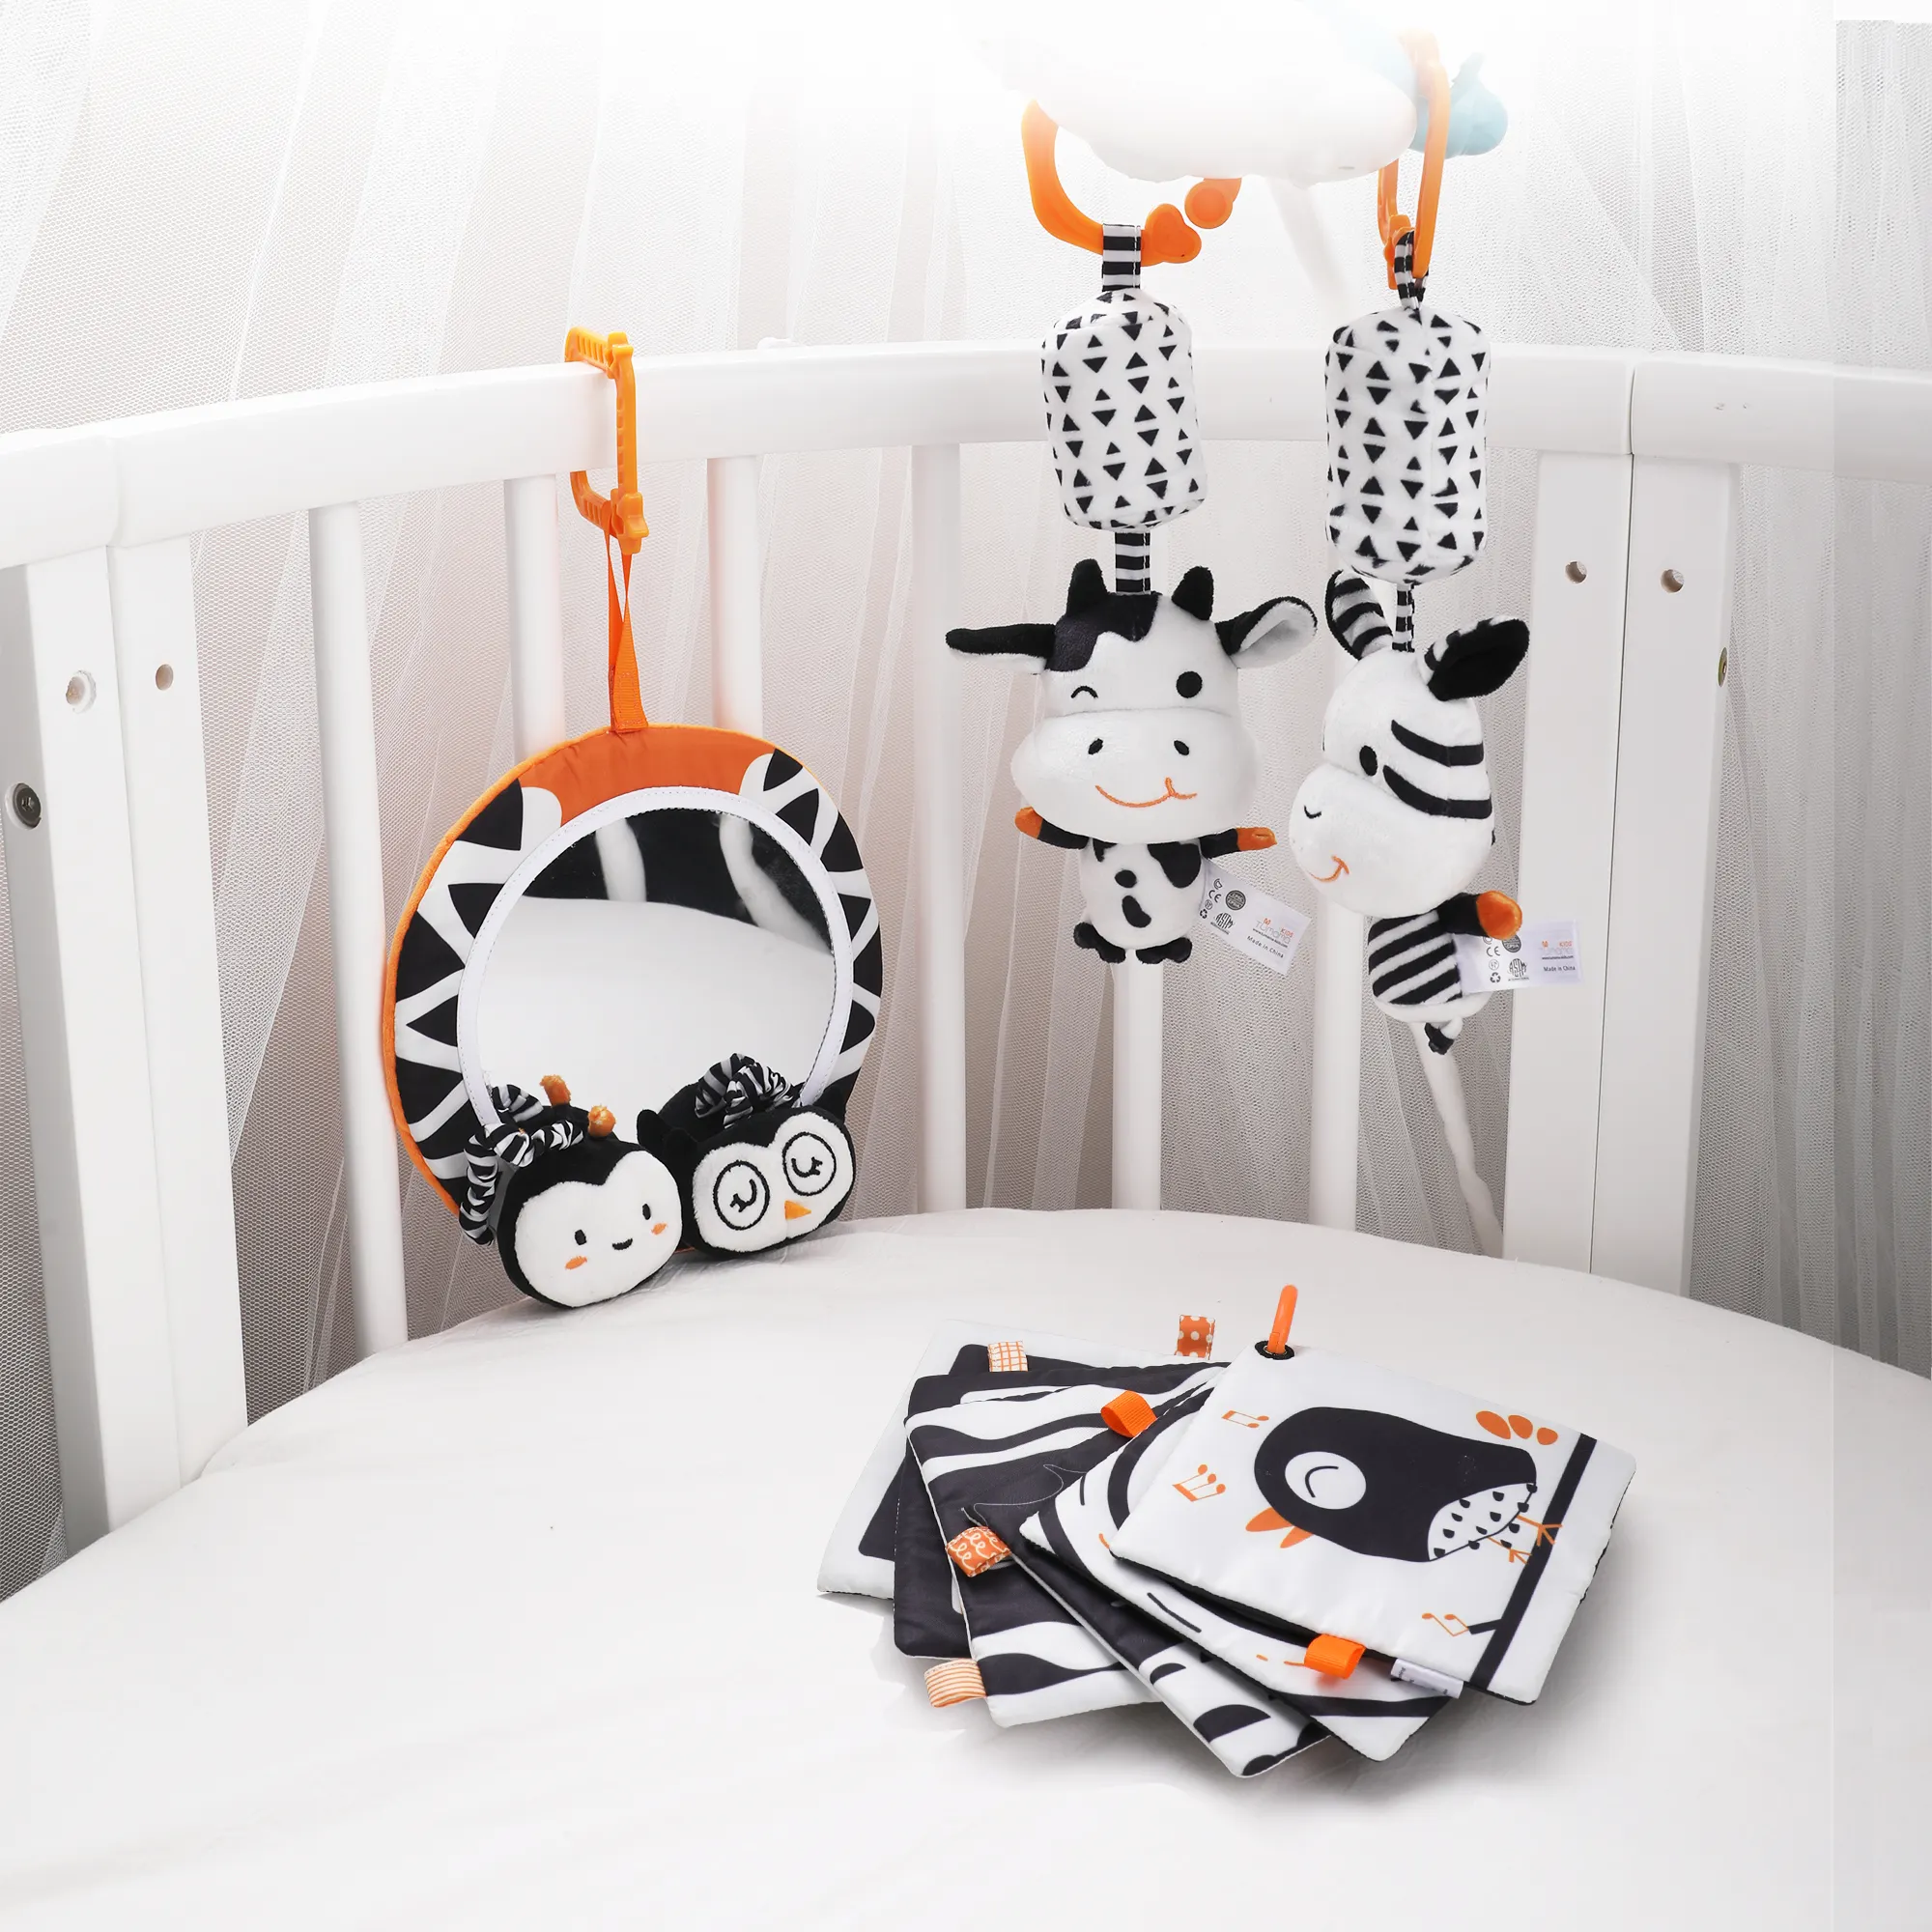 Tumama Black & White Animal Infant Plush Toy Soft Baby Rattle Stroller Hanging Toys With 1*Mirror 2* Hanging Rattles1*Cloth Book